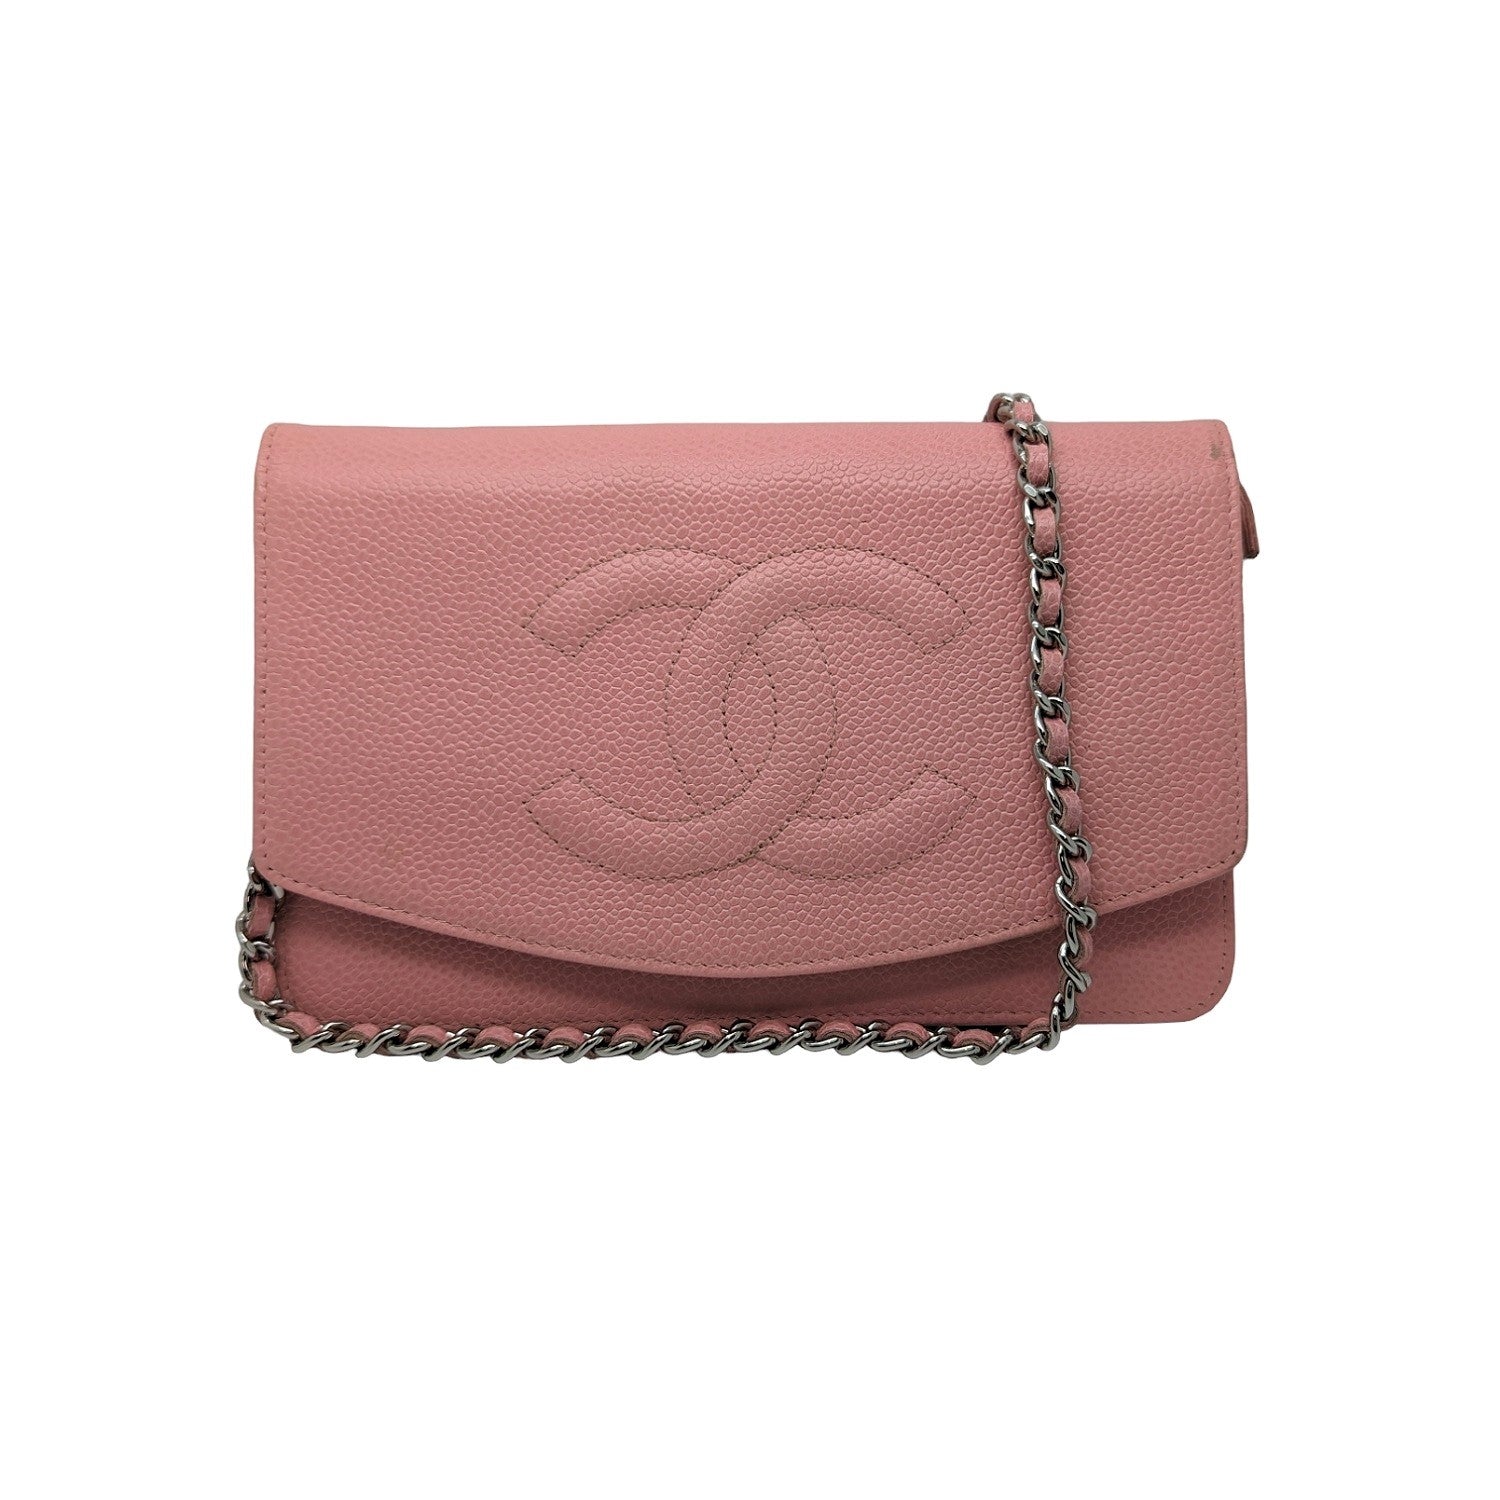 CHANEL Quilted Caviar Leather Top Zip Card Holder Light Pink